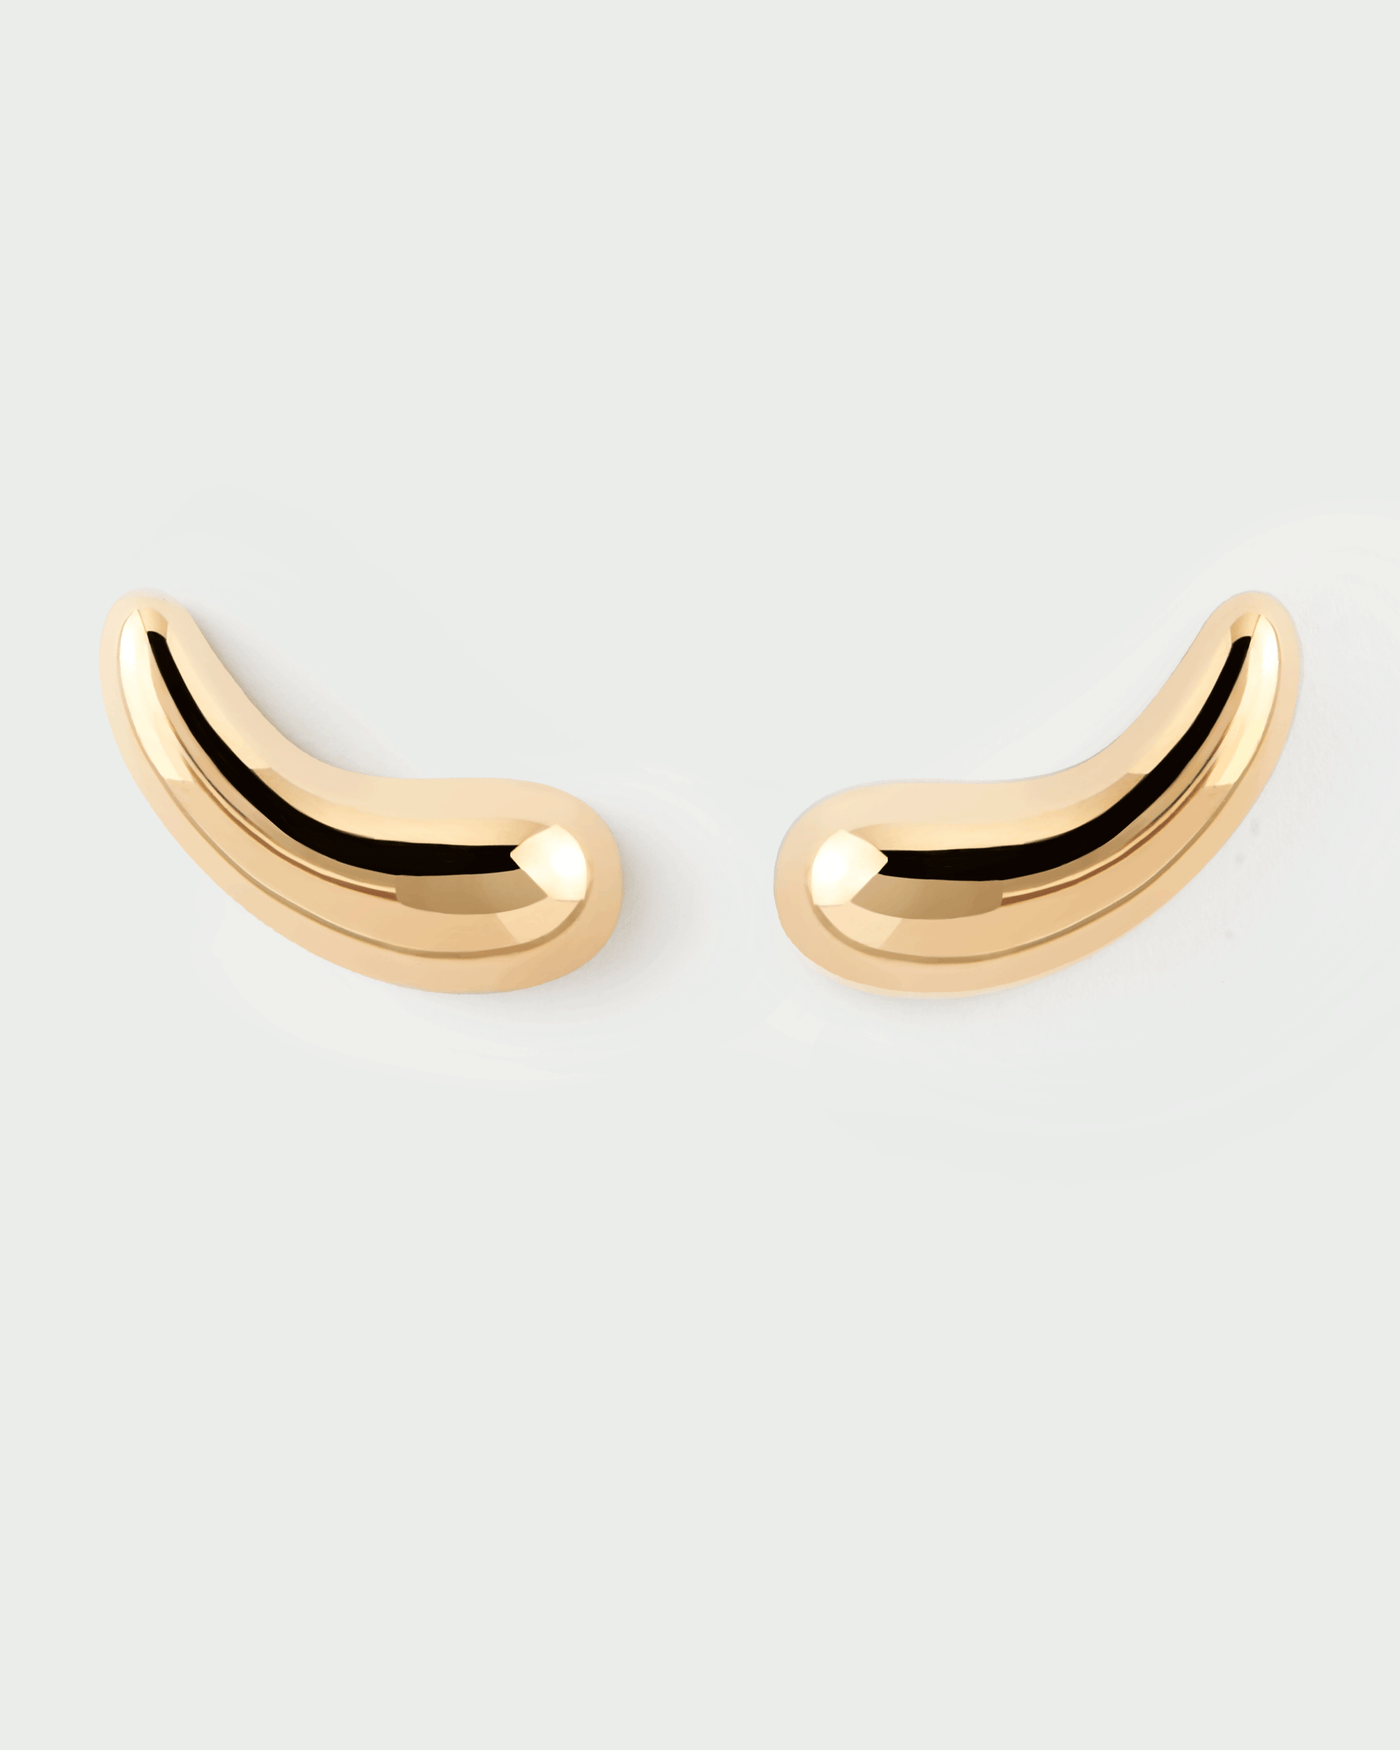 Aqua earrings. Gold-plated sculptural climbing earrings with a wavy bean shape . Get the latest arrival from PDPAOLA. Place your order safely and get this Best Seller.